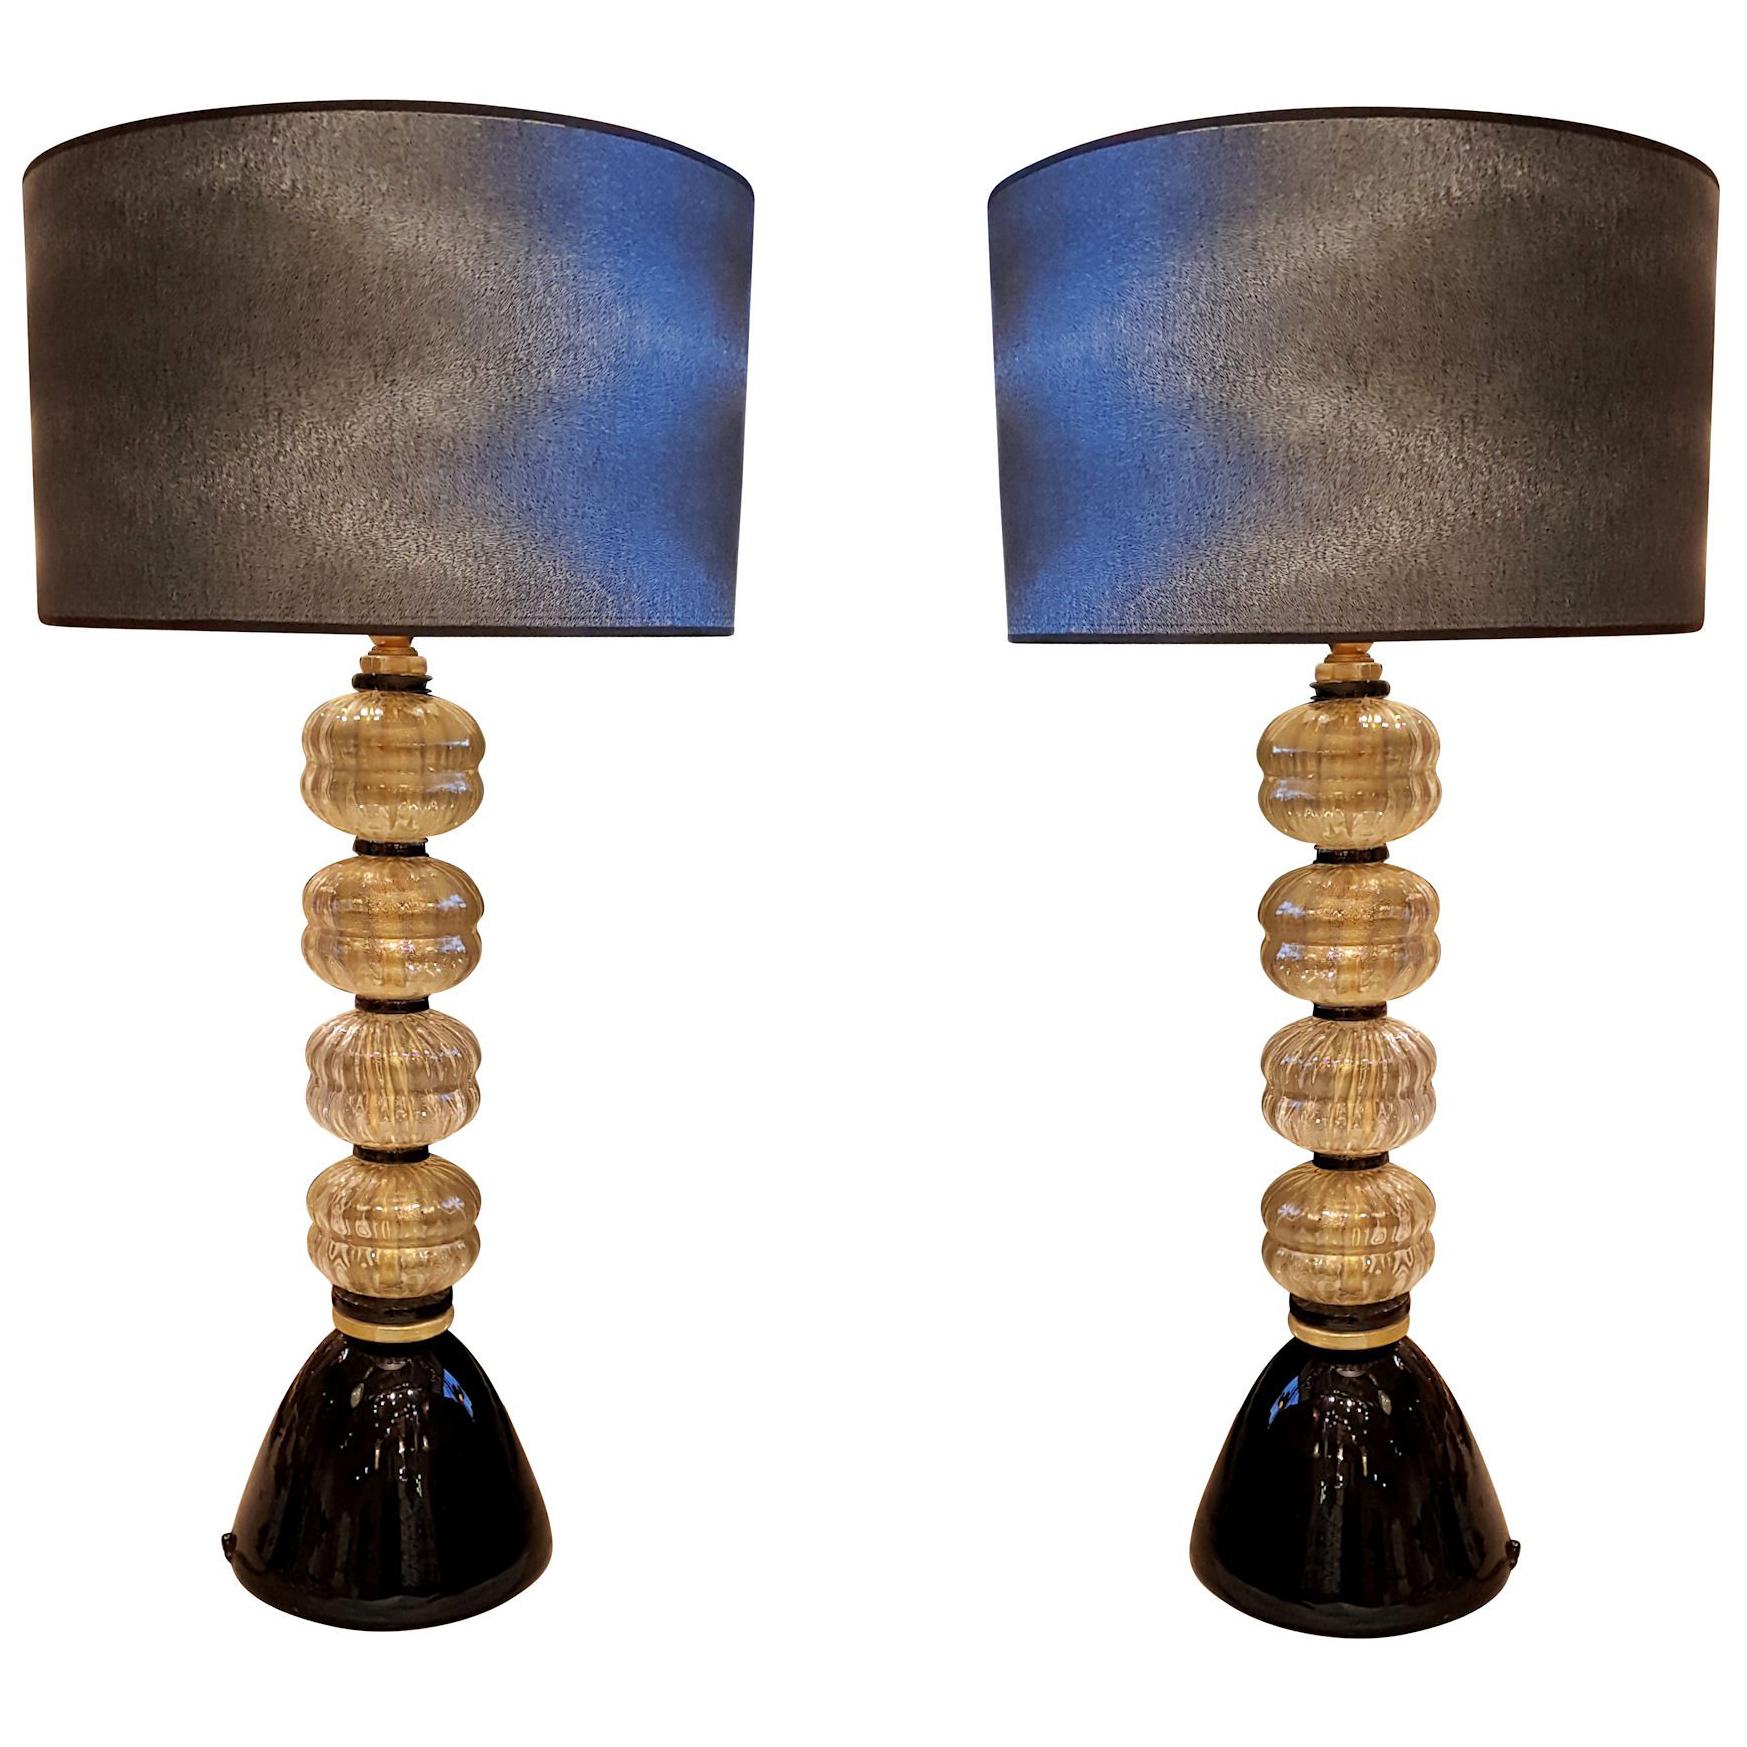 Pair of Mid-Century Modern Gold/Black Murano Glass table Lamps, Venini Style